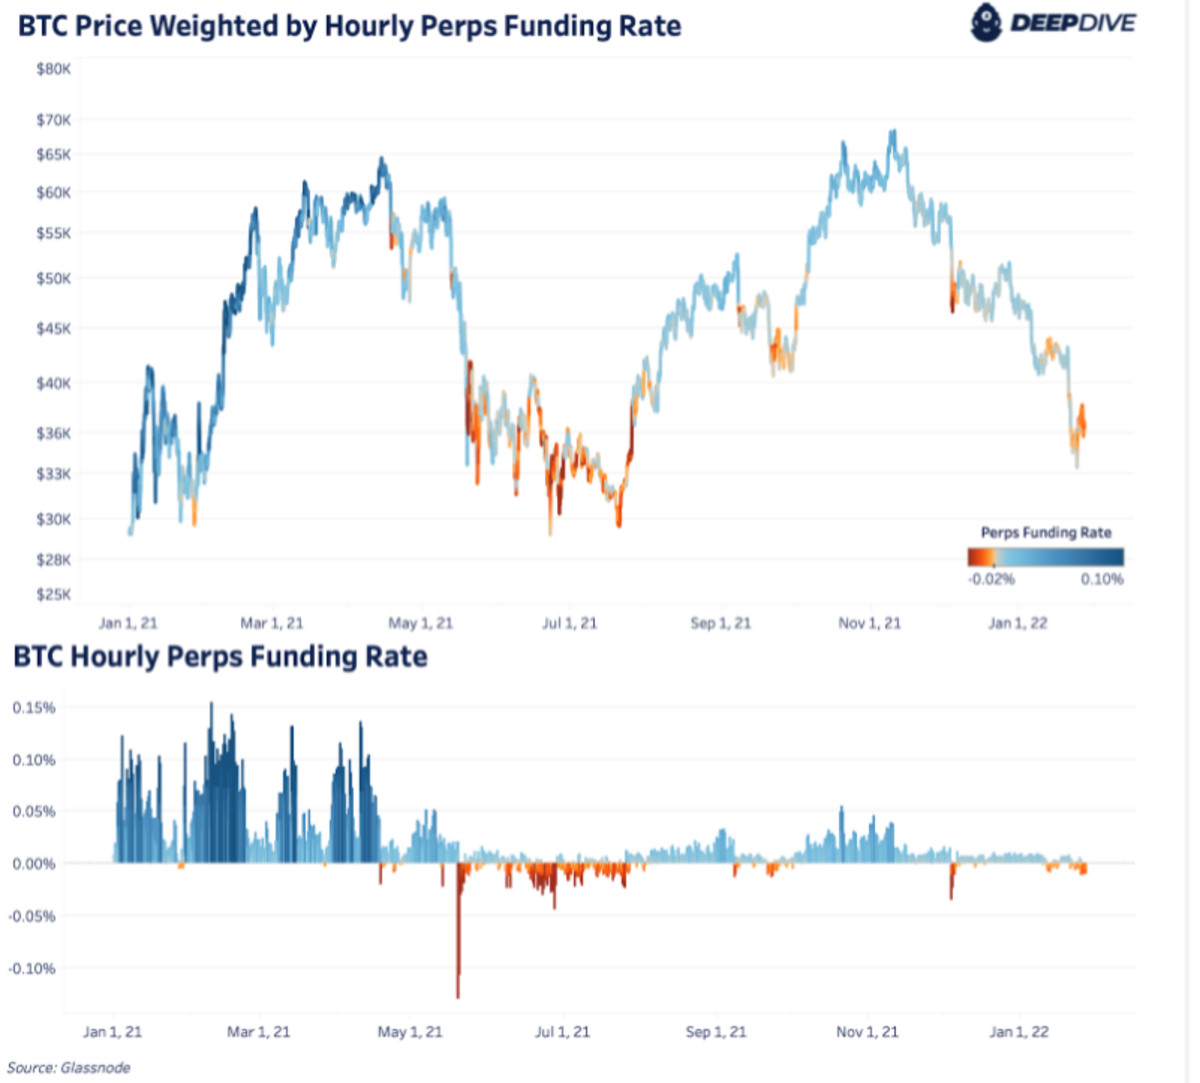 Recently, funding for bitcoin futures contracts has flipped negative and perpetual futures are trading below spot.